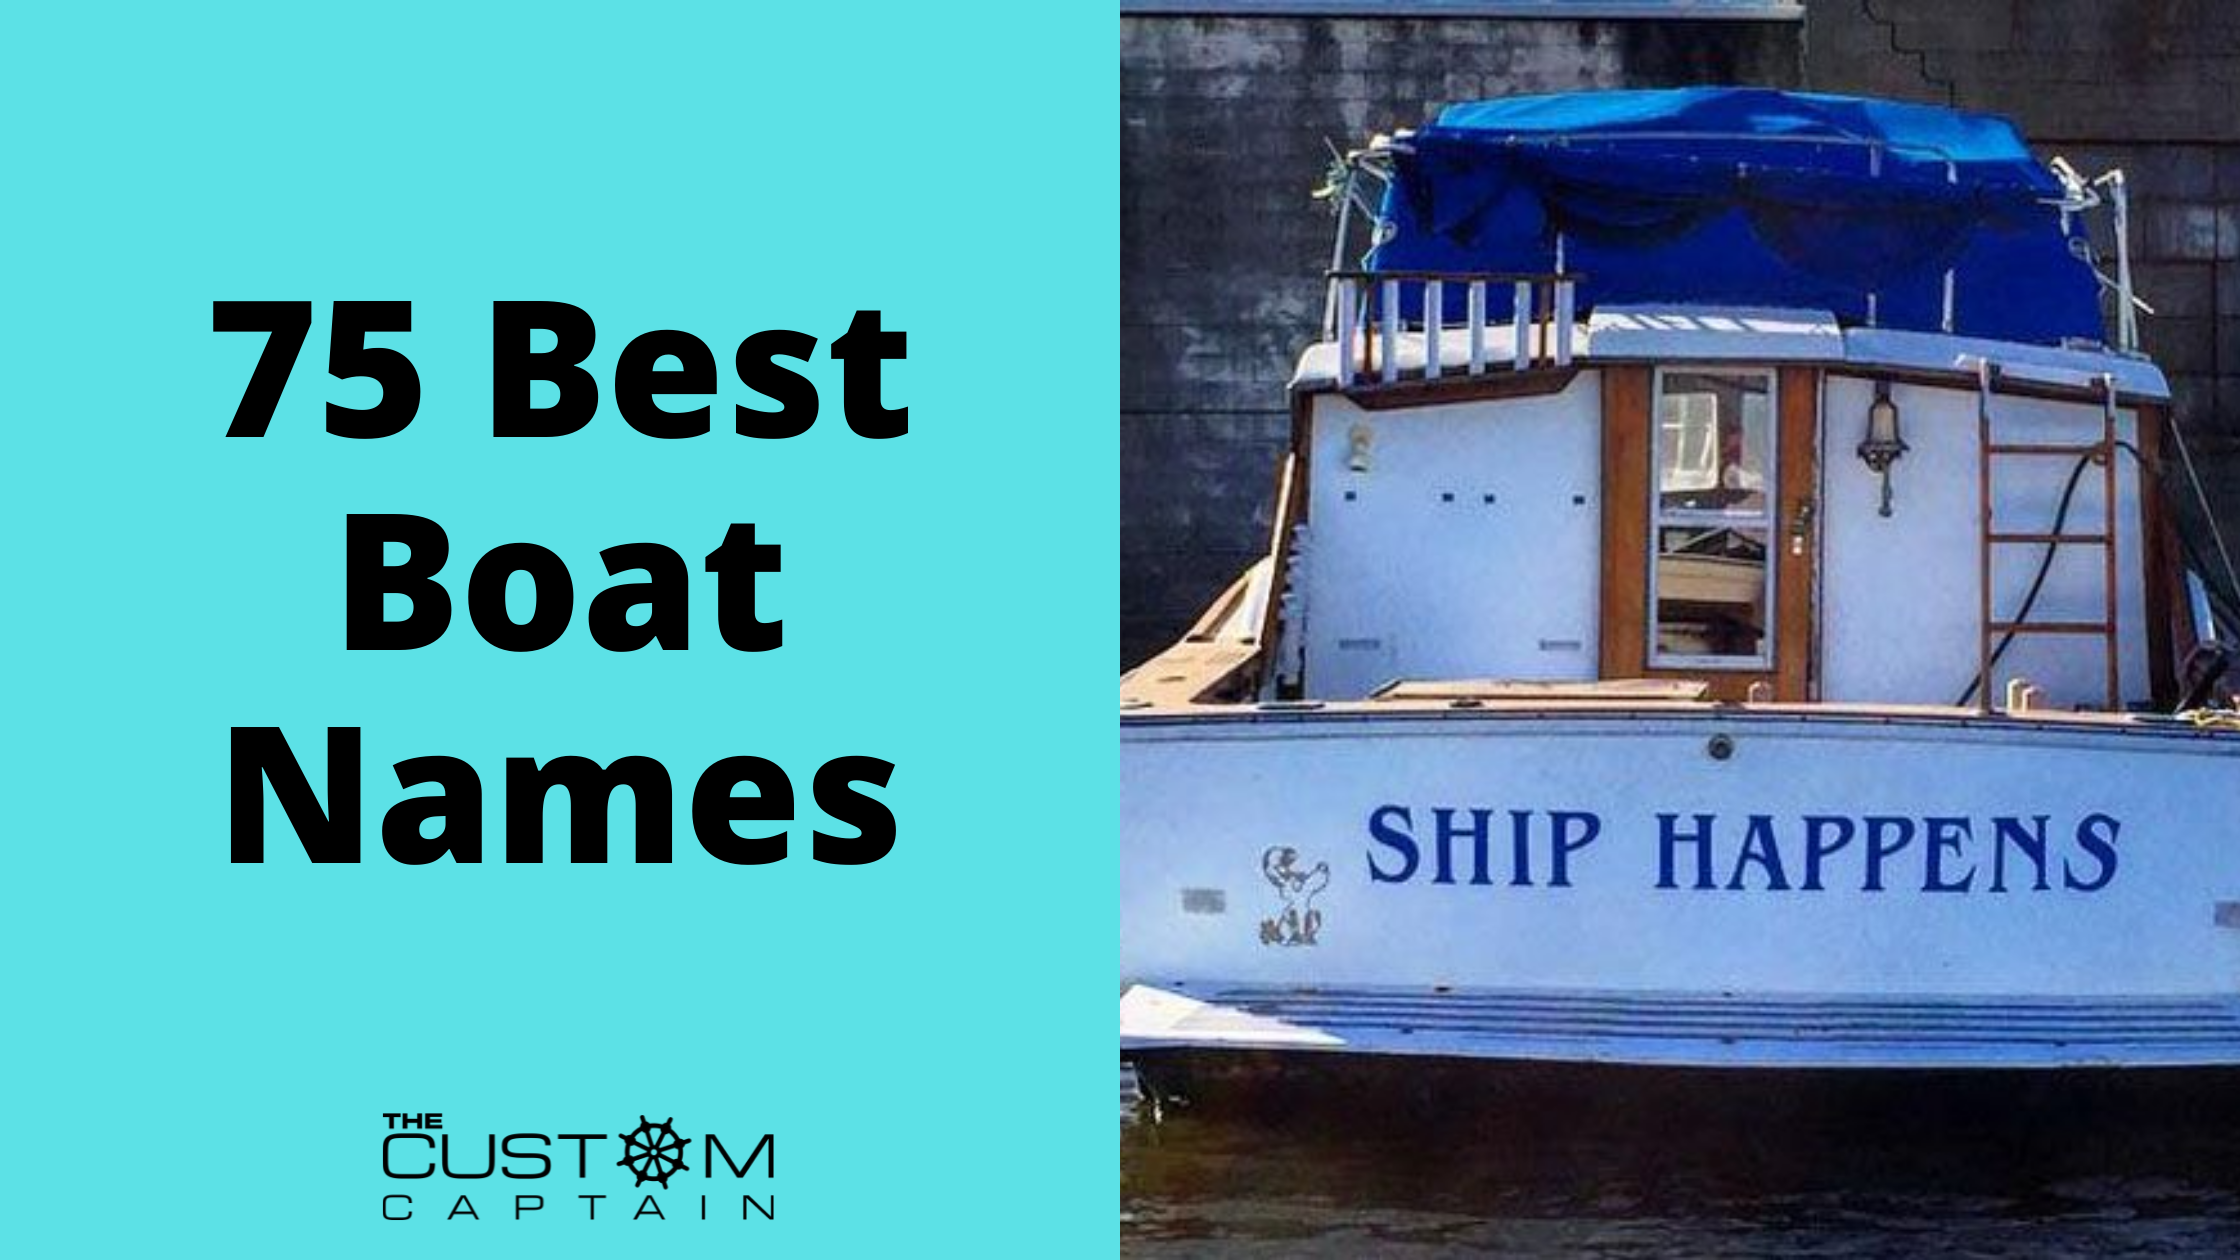 75 Boat Names For Your New SailBoat, Fishing Boats, Pontoon Boats and